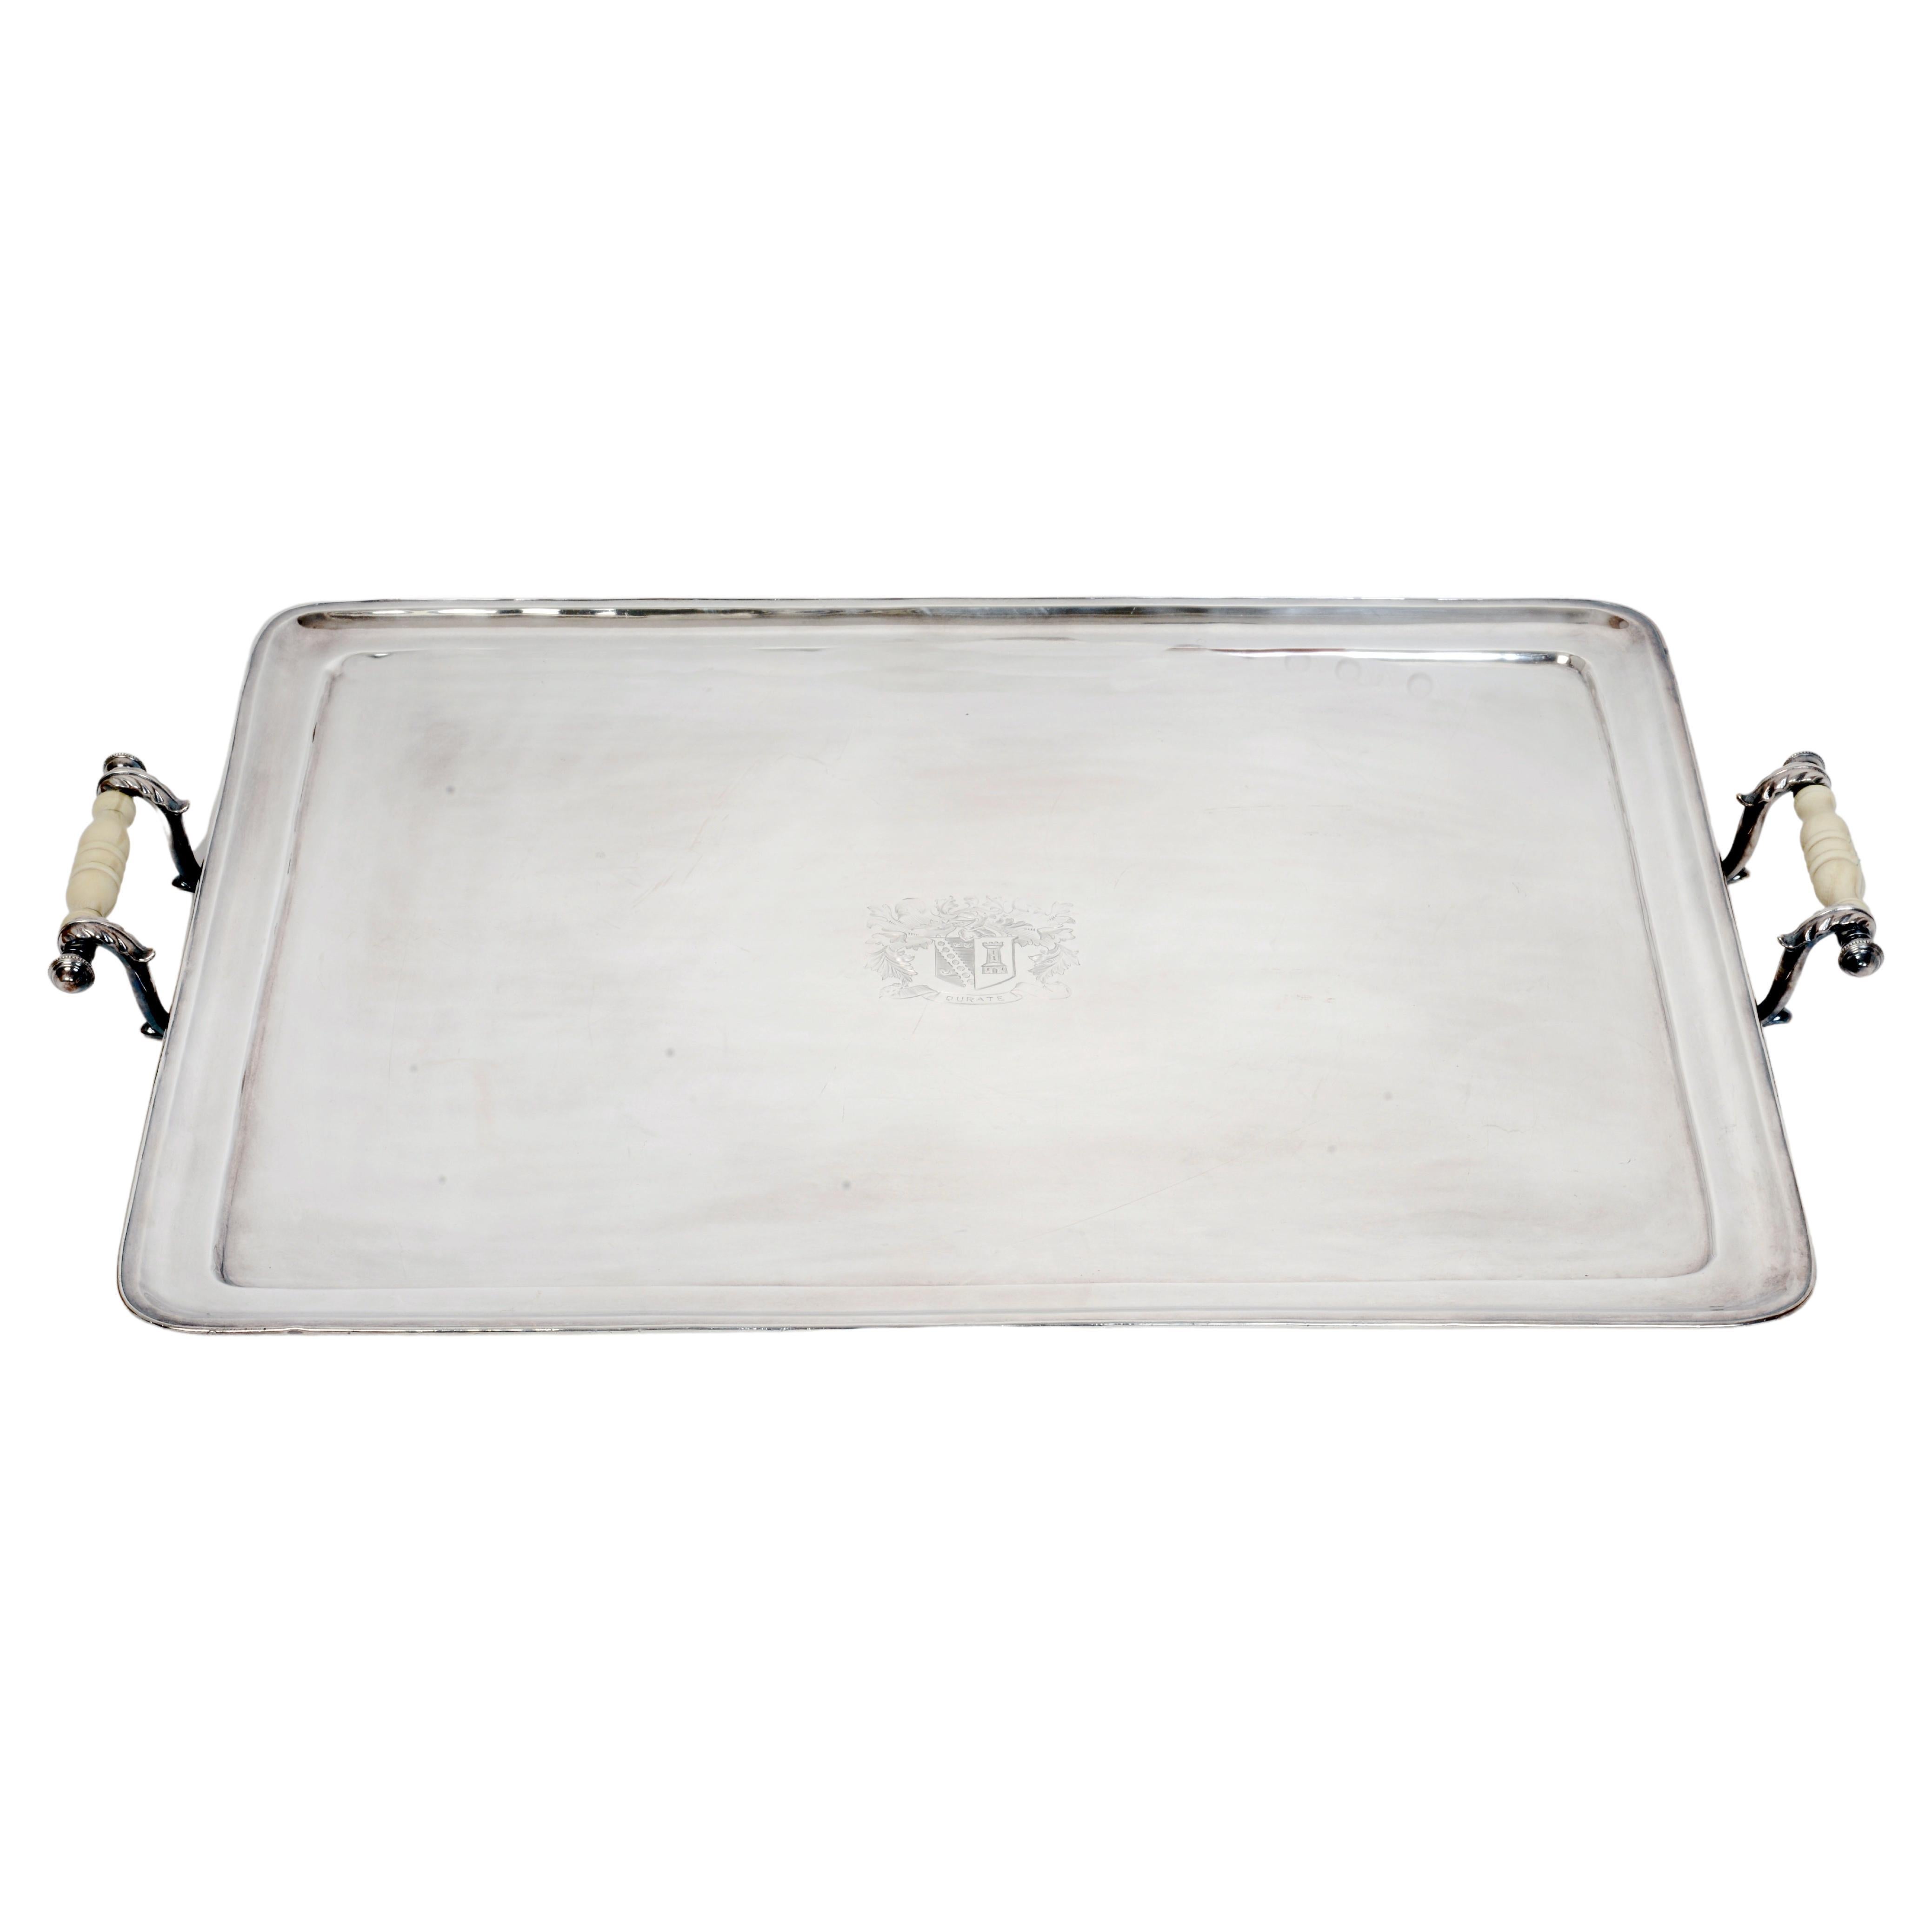 Large Antique Sheffield Tray with Armorial Engraving and Bone Handles c1800